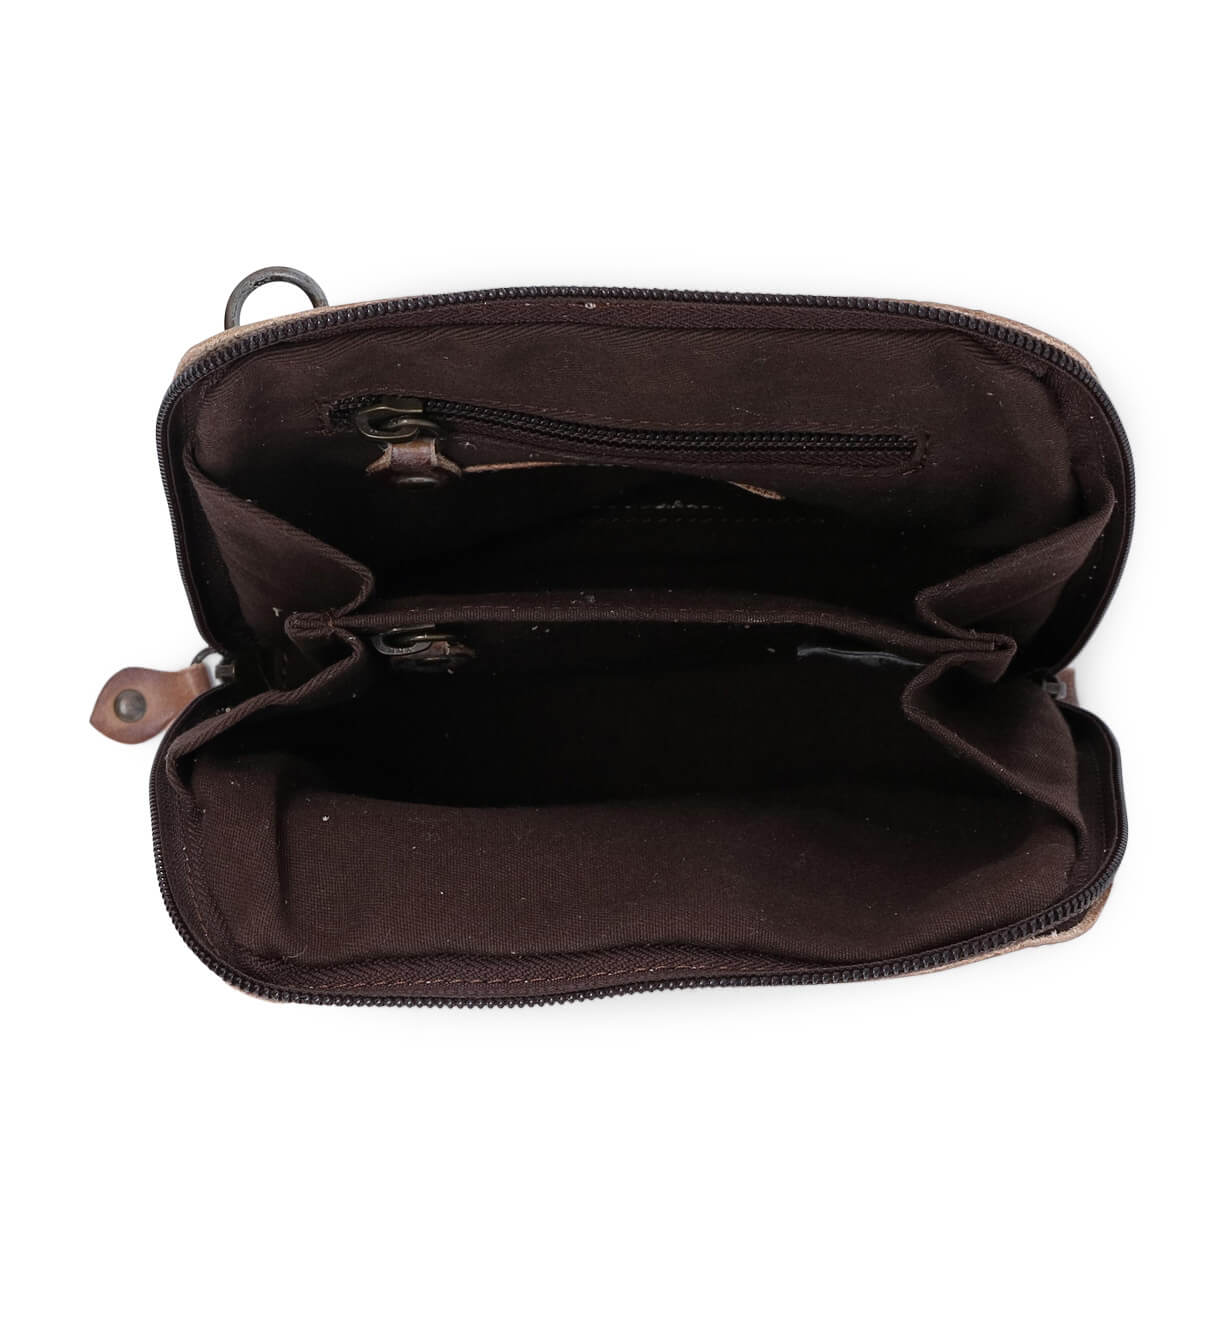 The inside of a Ventura brown purse with two zippers, by Bed Stu.